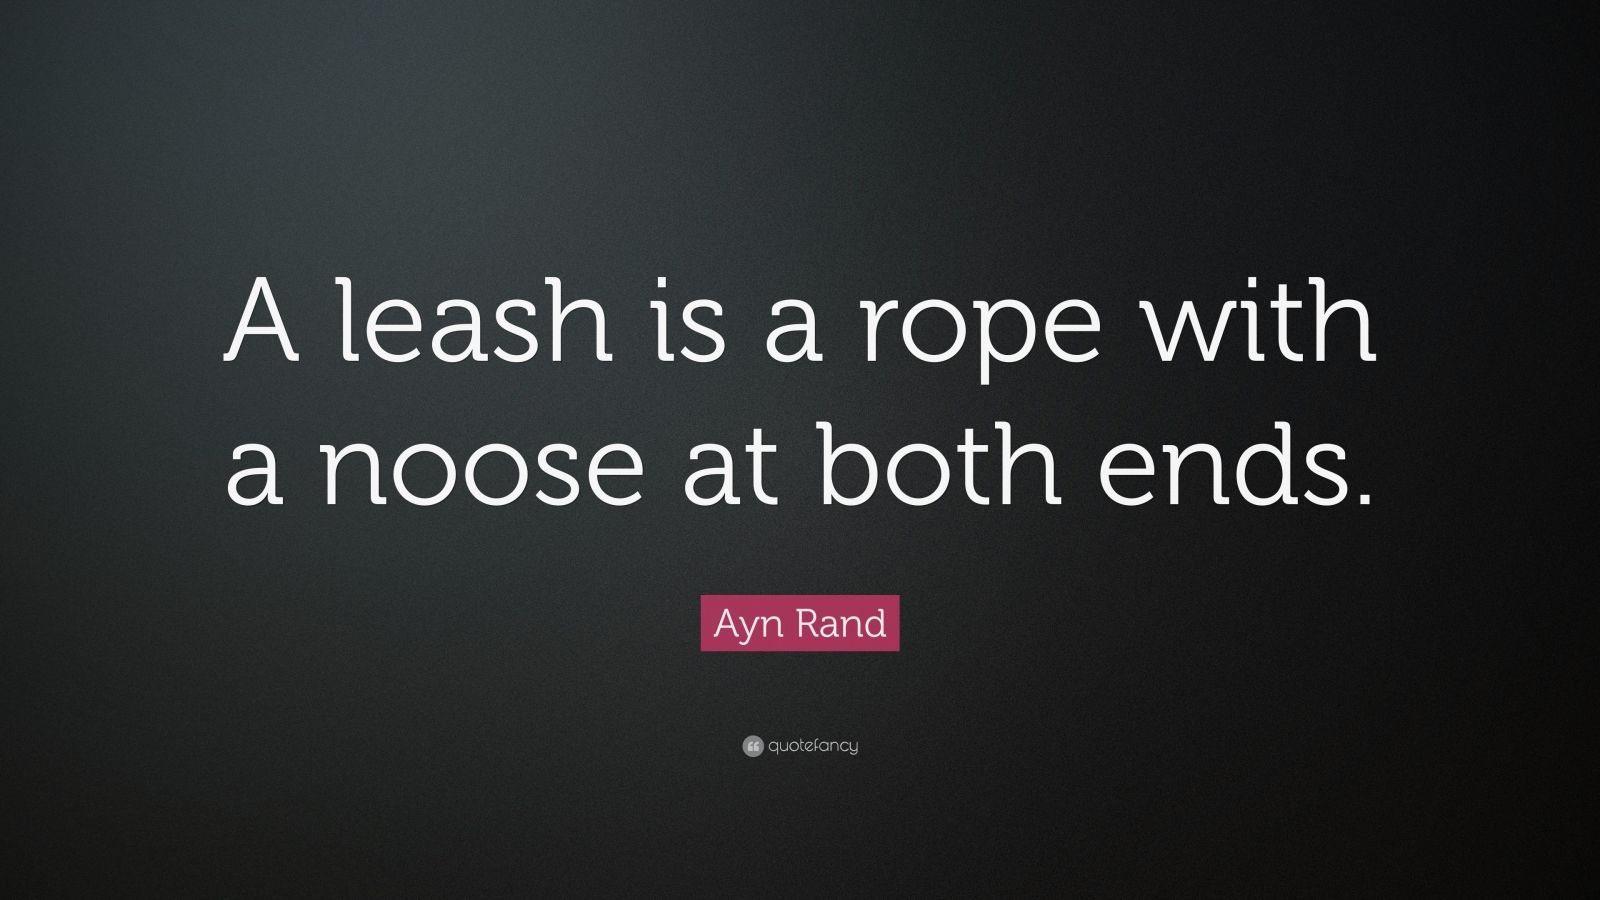 Ayn Rand Quote: “A leash is a rope with a noose at both ends.” 7